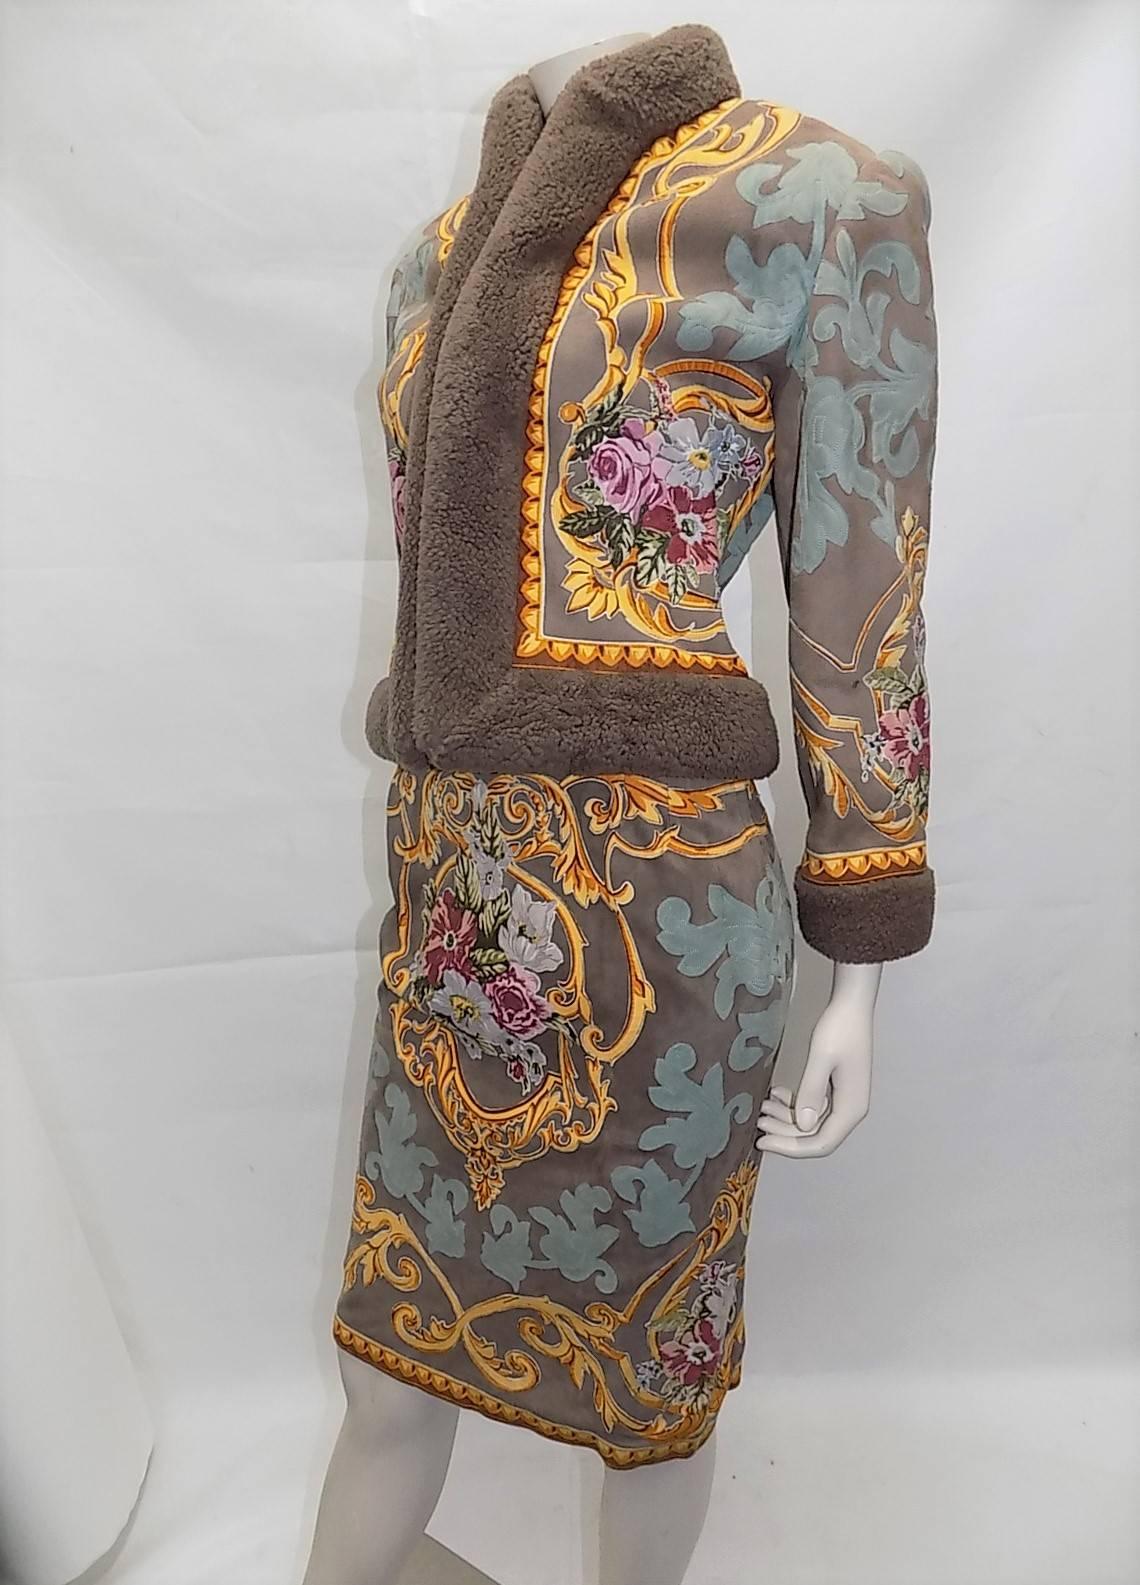 Absolutely stunning  shearling skirt suit from Valentino is made of tan suede with hand painted appliques sewn  throughout depicting flowers and scrolling patterns. Jacket has shearling trim along cuffs, collar, and center front as well as center